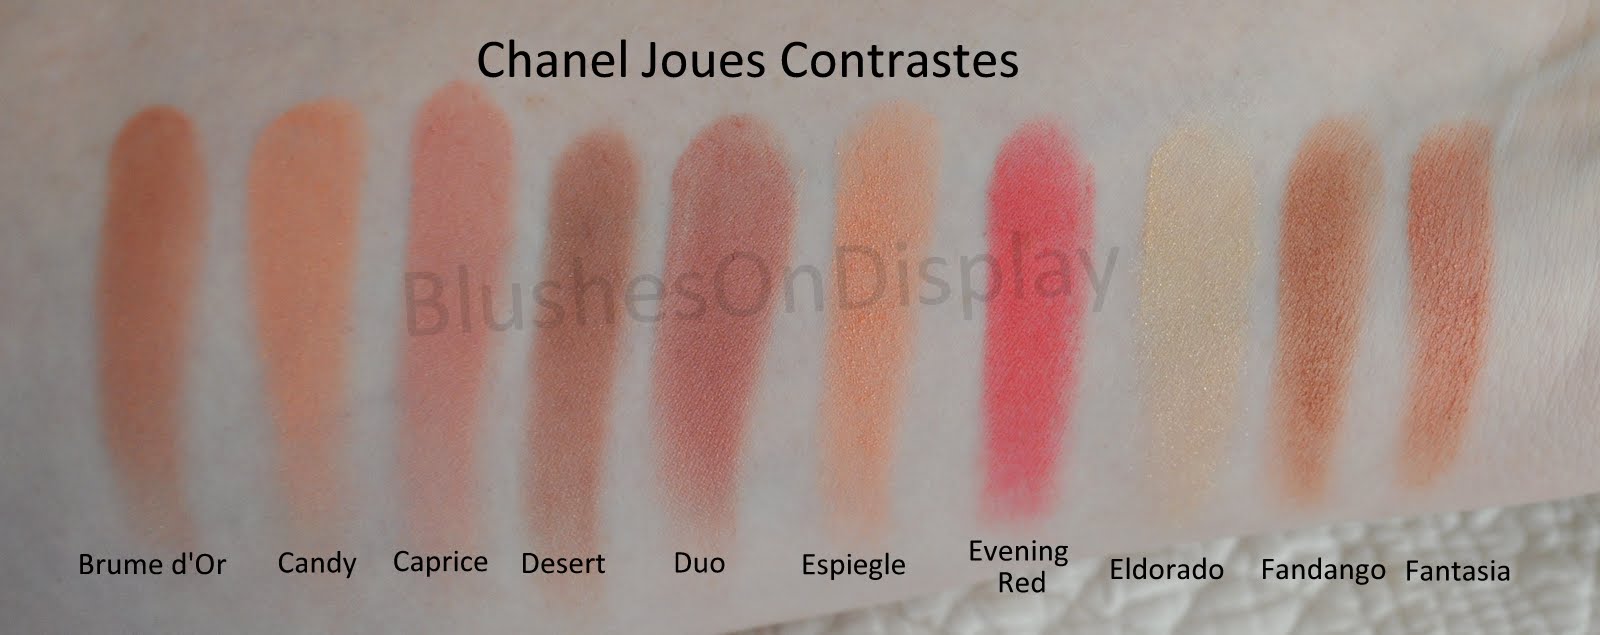 on Display: Chanel Joues Contraste